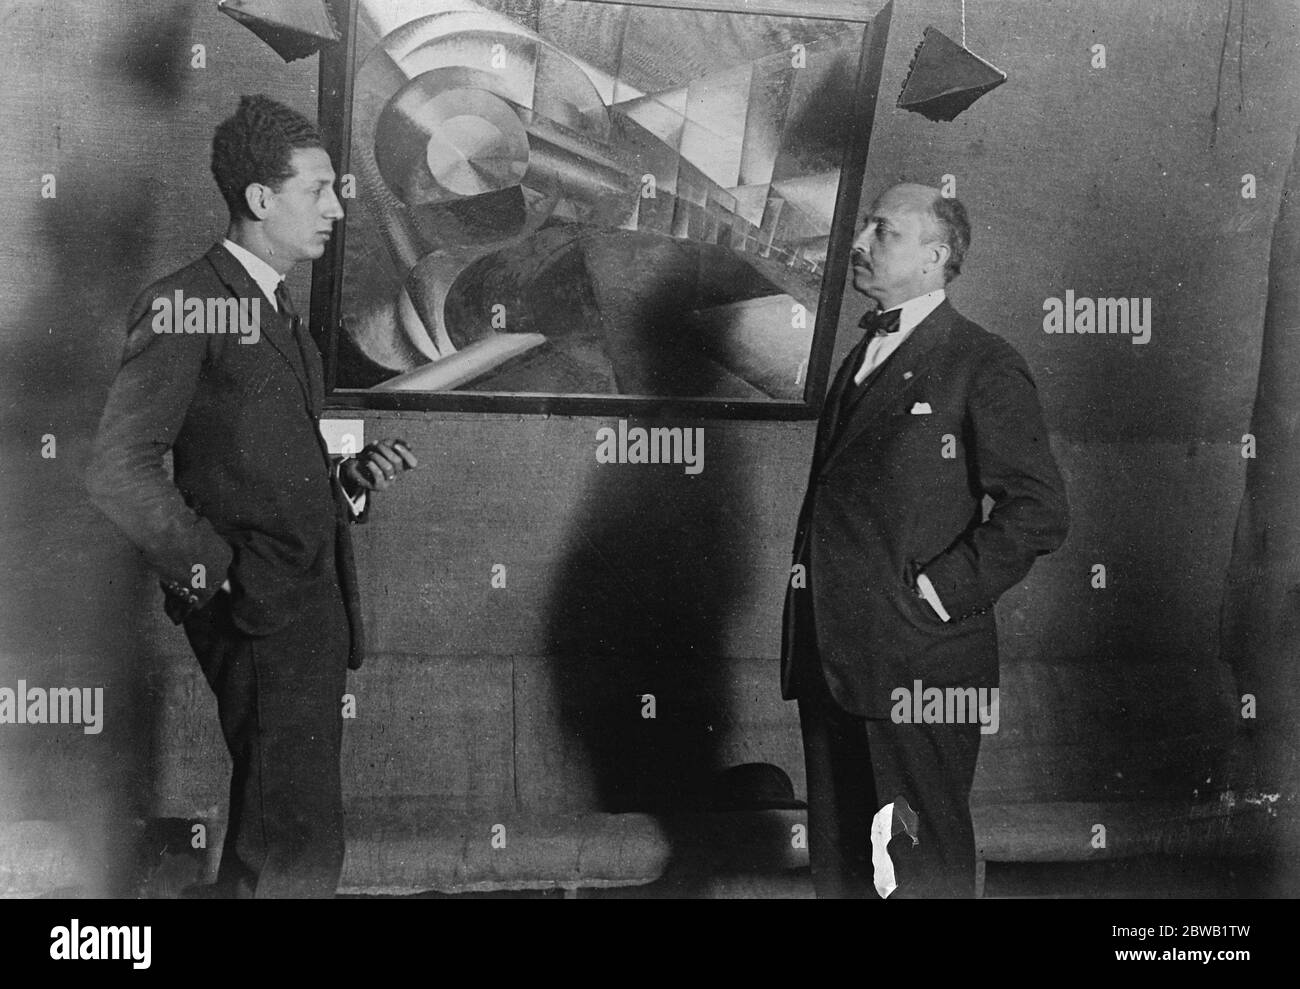 Futurist Art Leader At a Futurist Art Exhibition in Rome A new exhibition of futurist 's work has been opened at Rome . On right is seen Signor Marinette the futuristi art leader standing before a a painting entitled ' The Train ' 27 Jauary 1923 Stock Photo